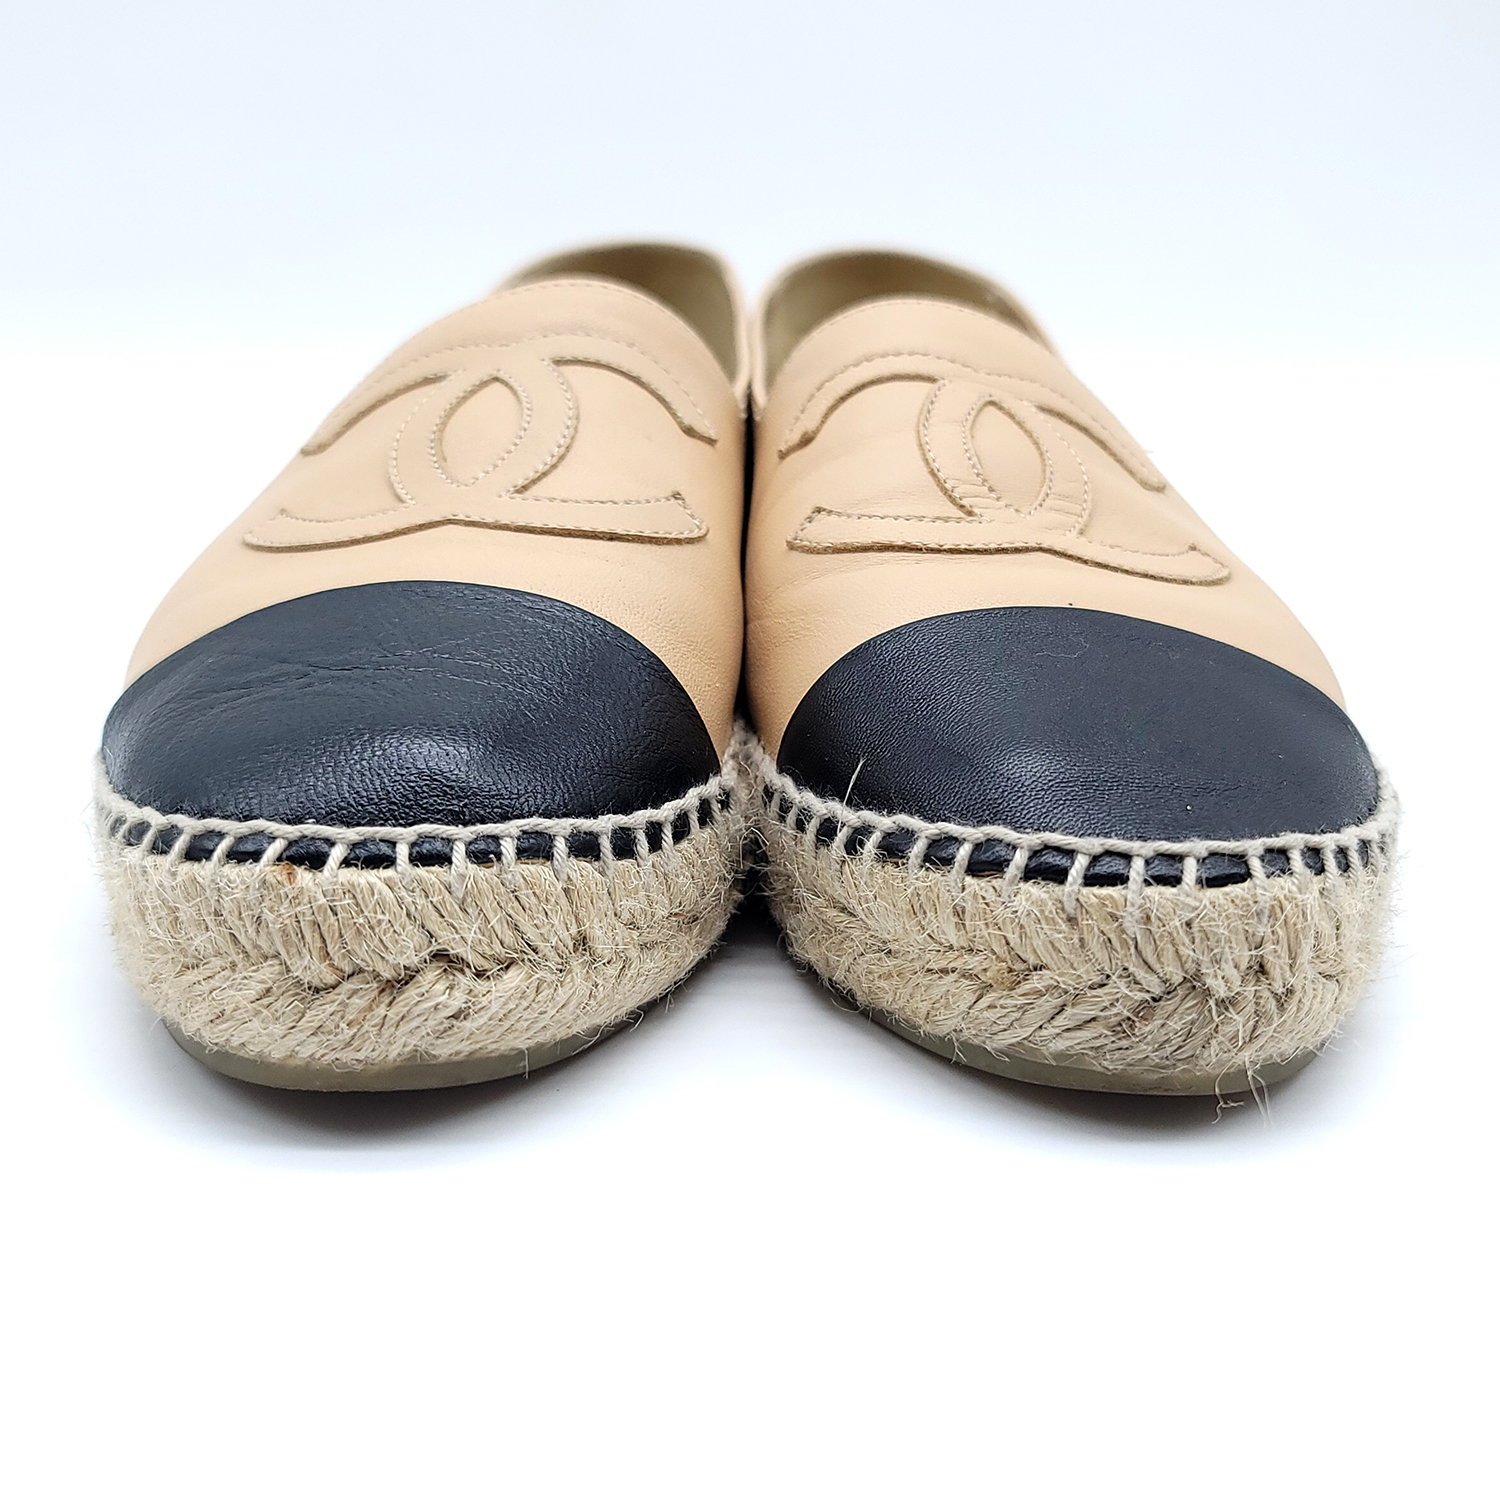 Chanel Espadrilles in quilted beige and black colour